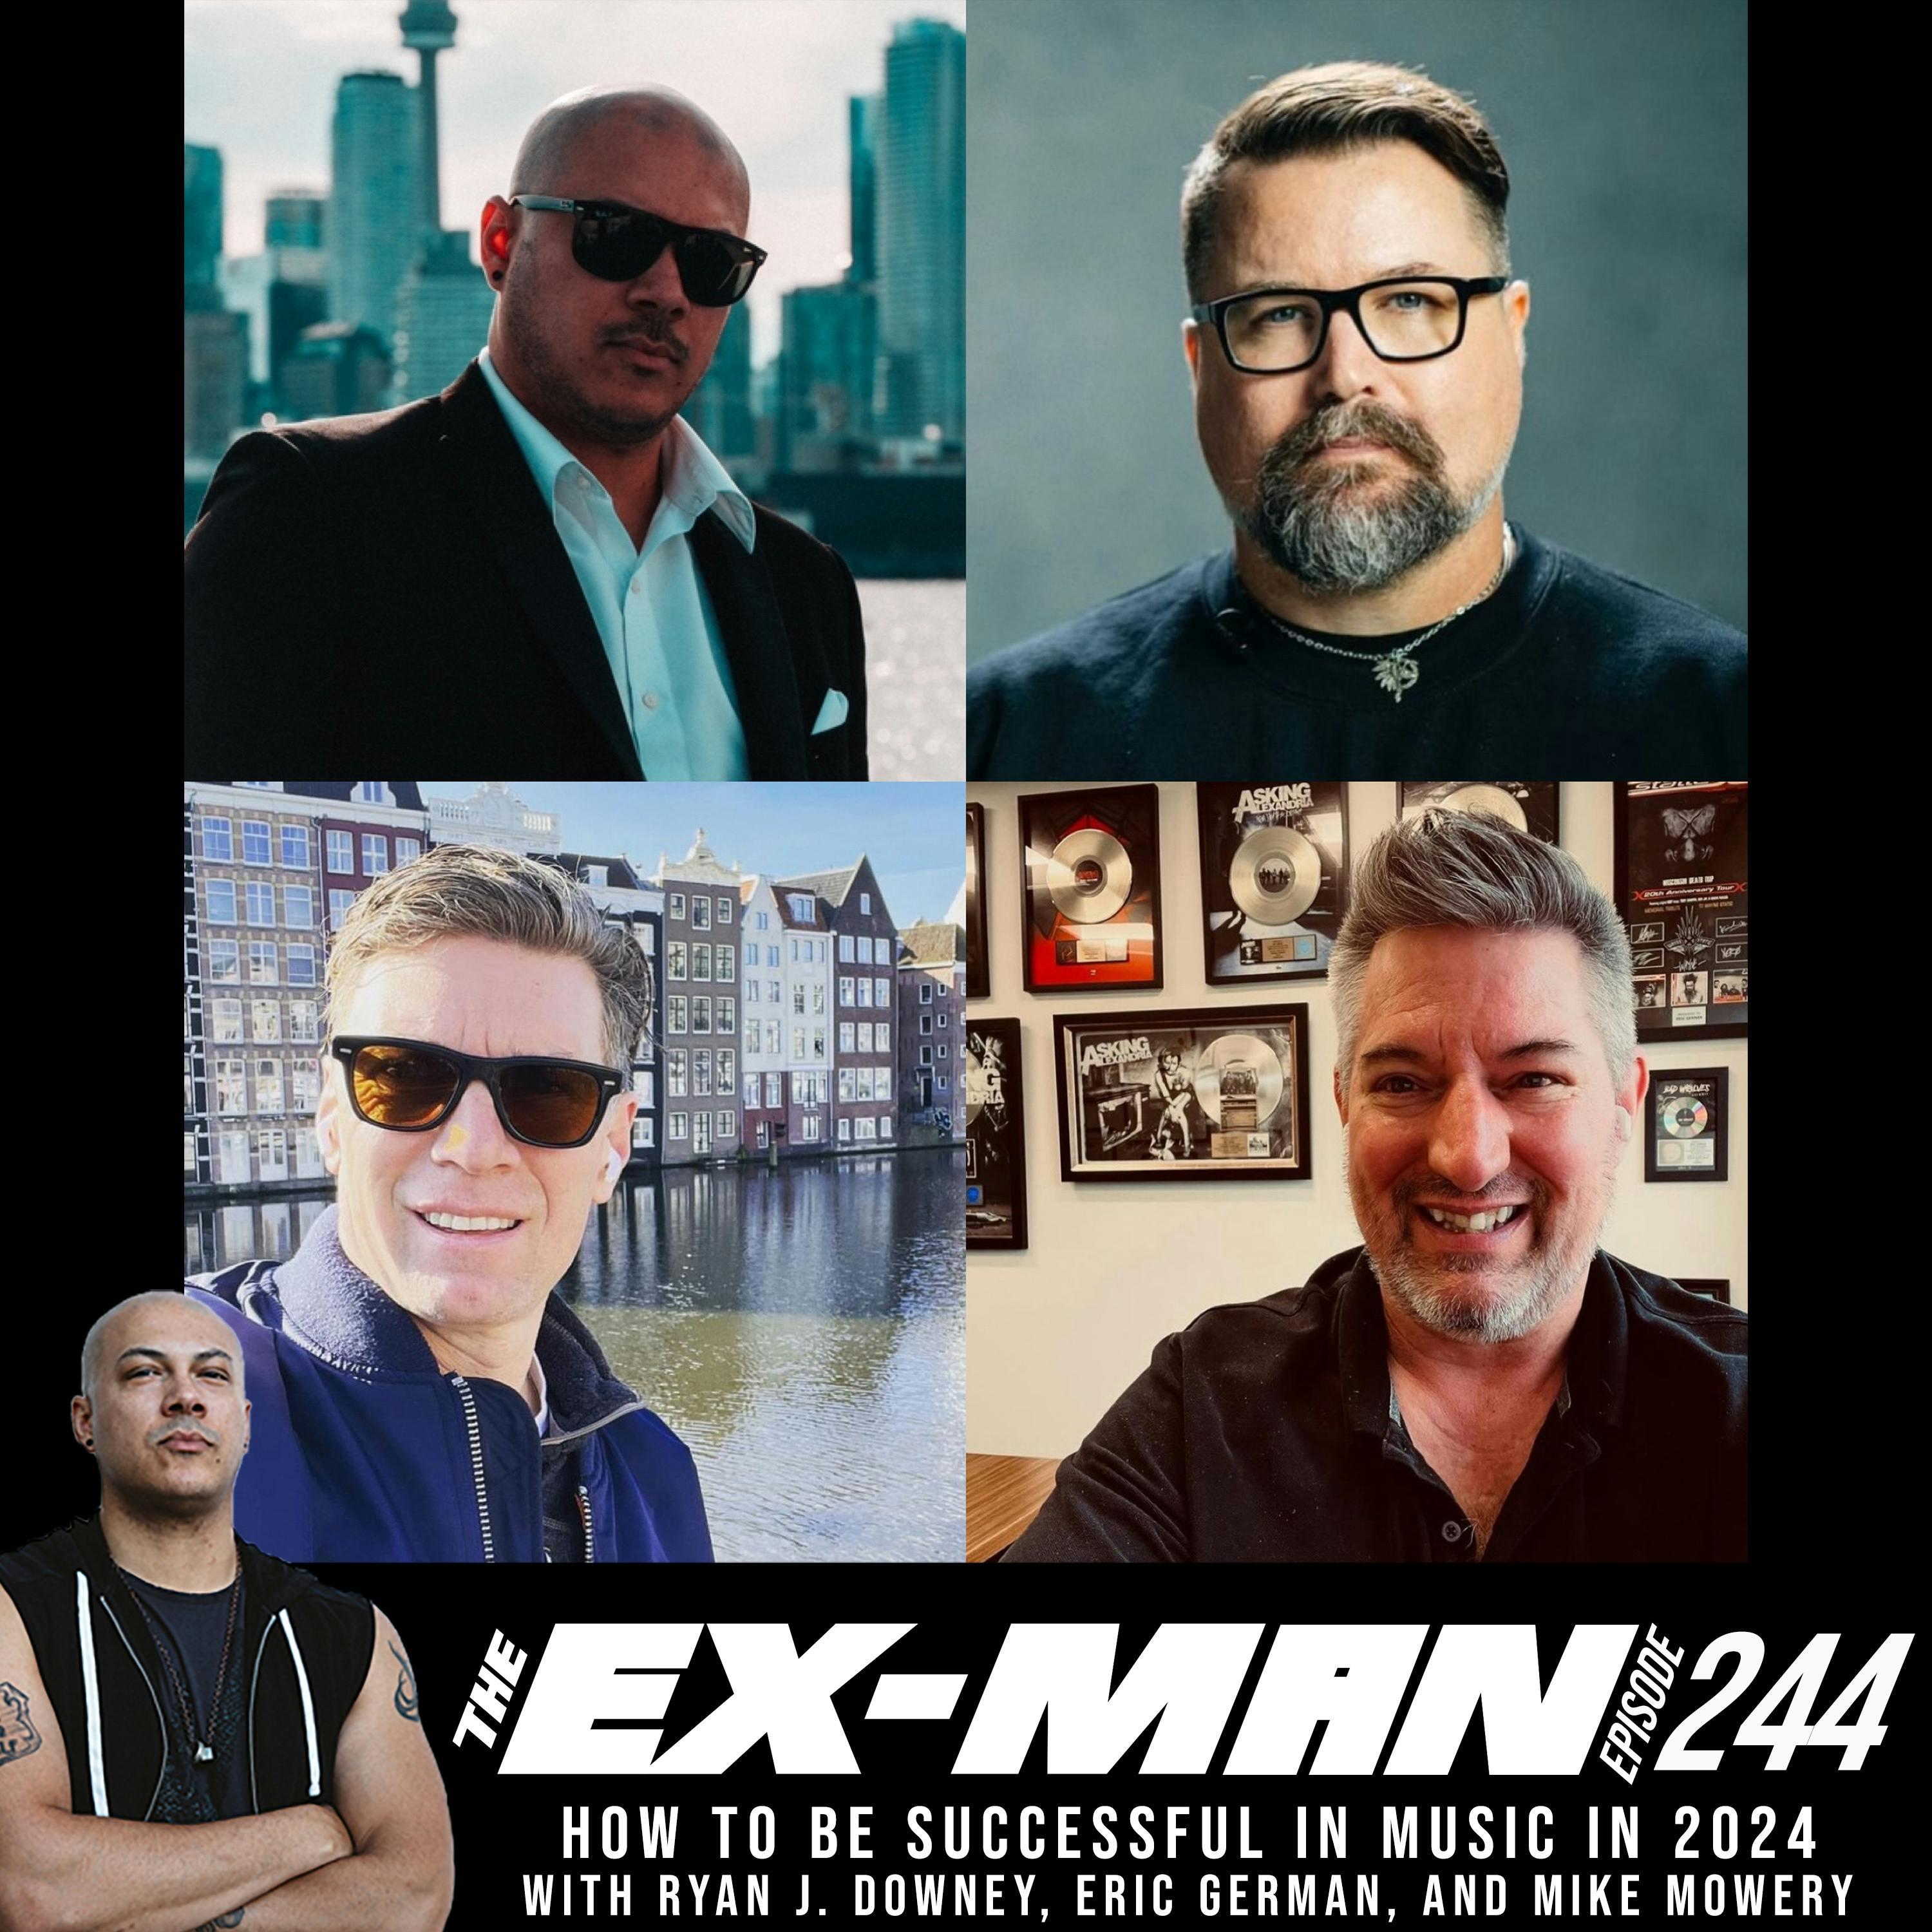 How To Be Successful In Music in 2024 with Ryan J. Downey, Eric German, and Mike Mowery